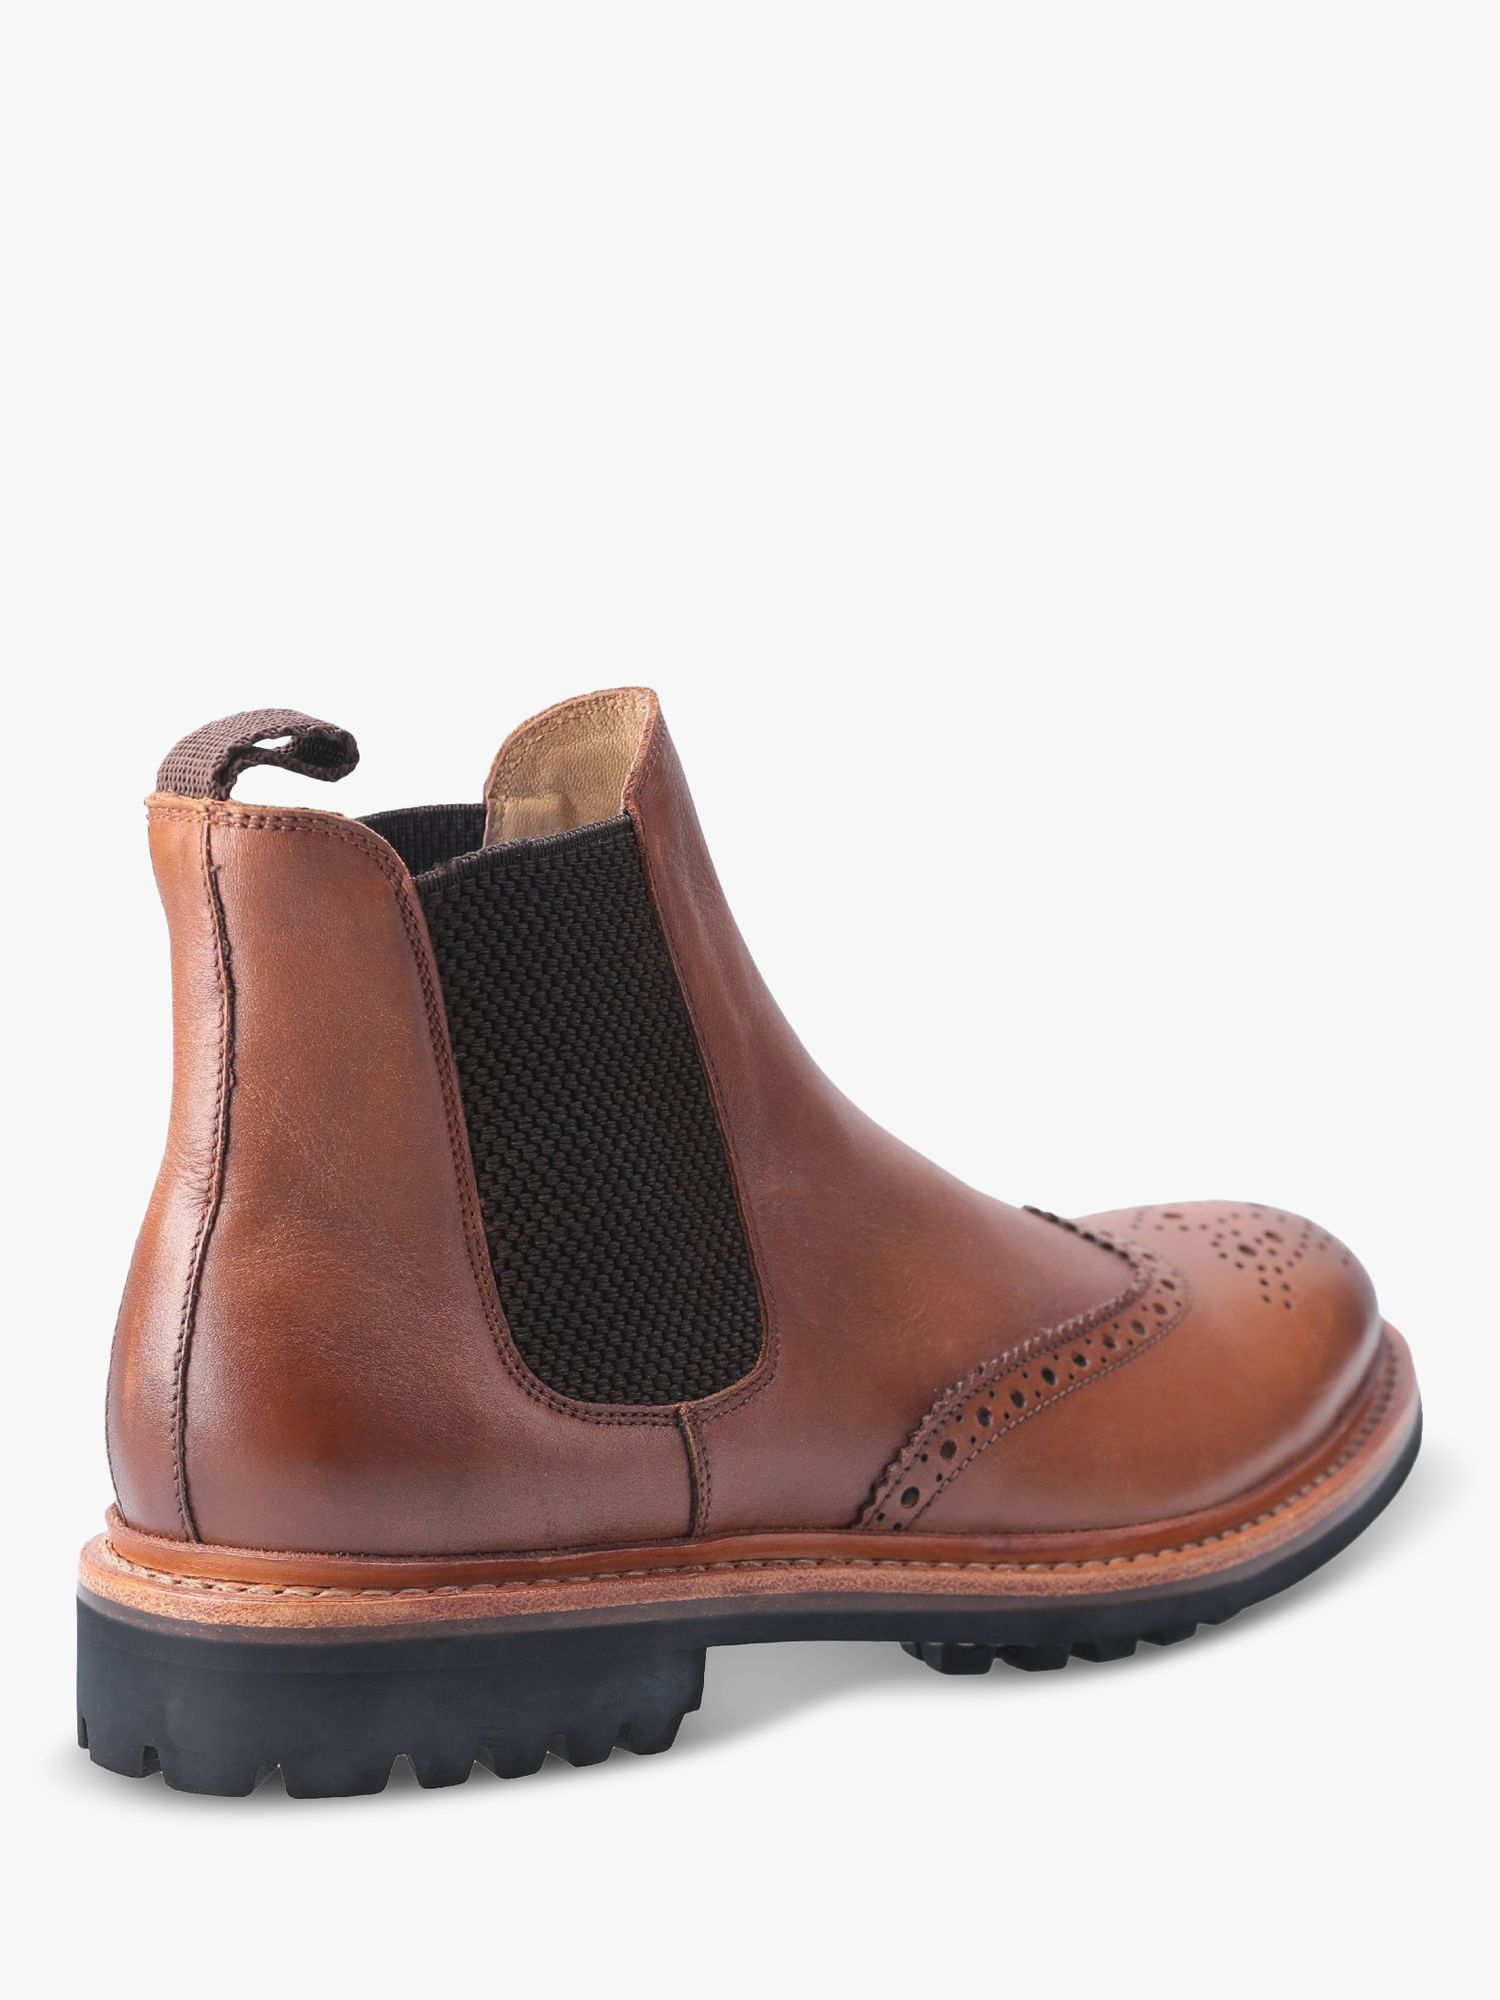 Cotswold Rissington Commando Goodyear Welt Chelsea Boots, Brown at John ...